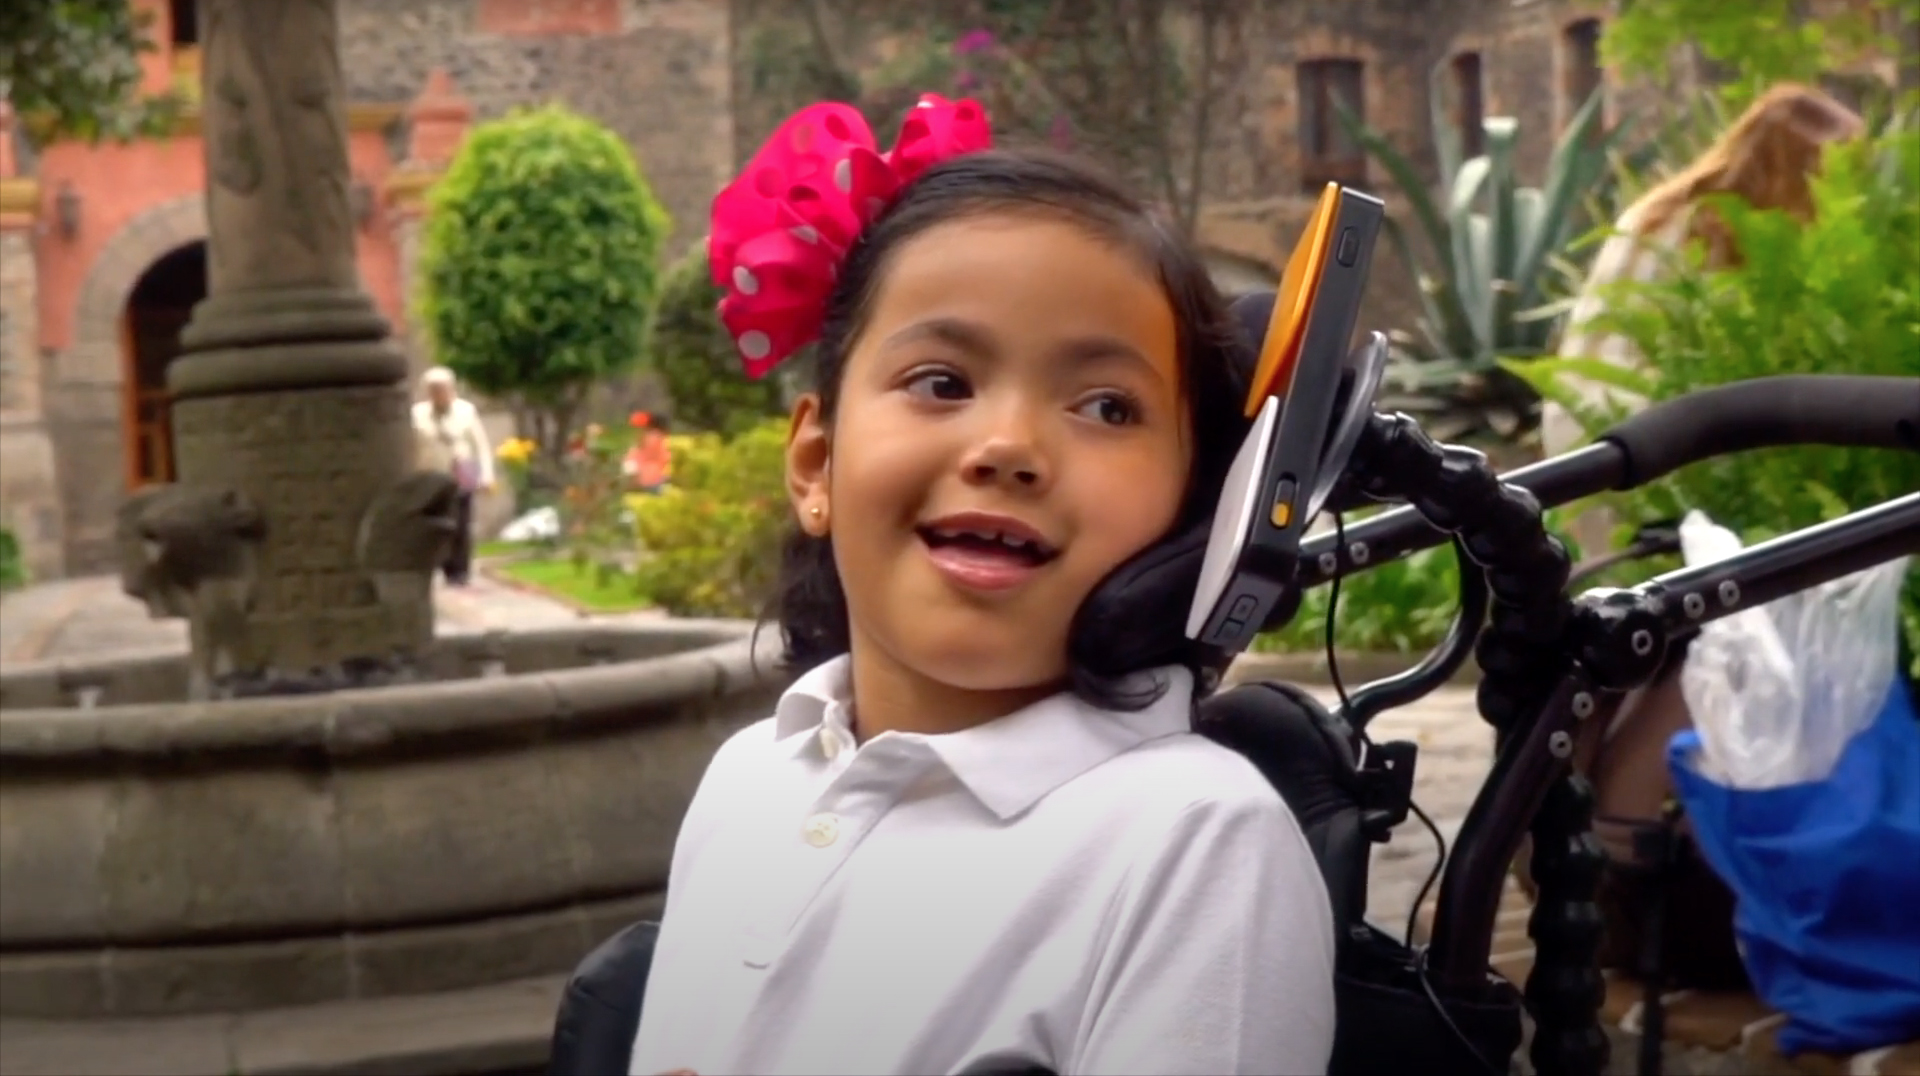 A young girl is smiling at something or someone to the right of the camera. Her hair is tied with a magenta ribbon with white polka dots, set off by the lush greens of the tropical plants in a courtyard garden. She has two large switches, one yellow, one white, on the headrest of her wheelchair. Other objects of daily life include some polythene bags on a low wall behind her.